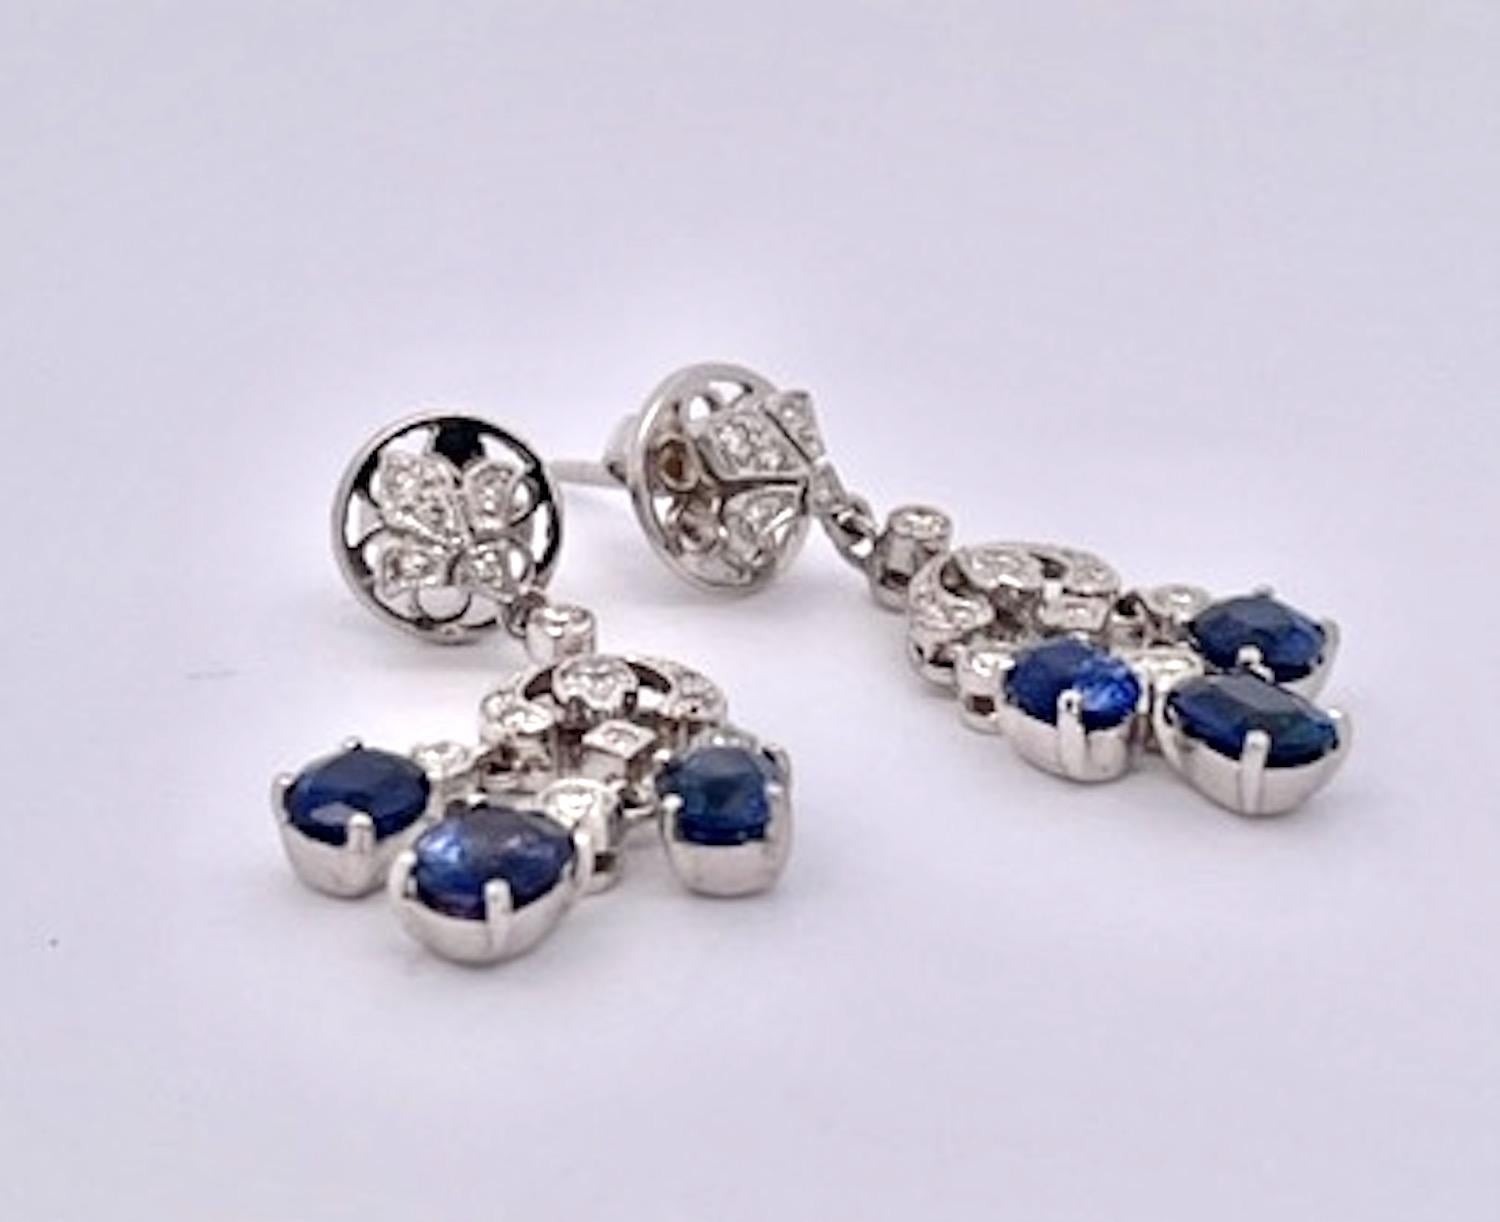 Just received from a London auction, these tassel drop earrings are divine.  These Sapphire tassel earrings have extra beautiful clean clear deep Blue Sapphires and are made in 18K White Gold. These Sapphire Tassel Drop Earrings features a fleur de